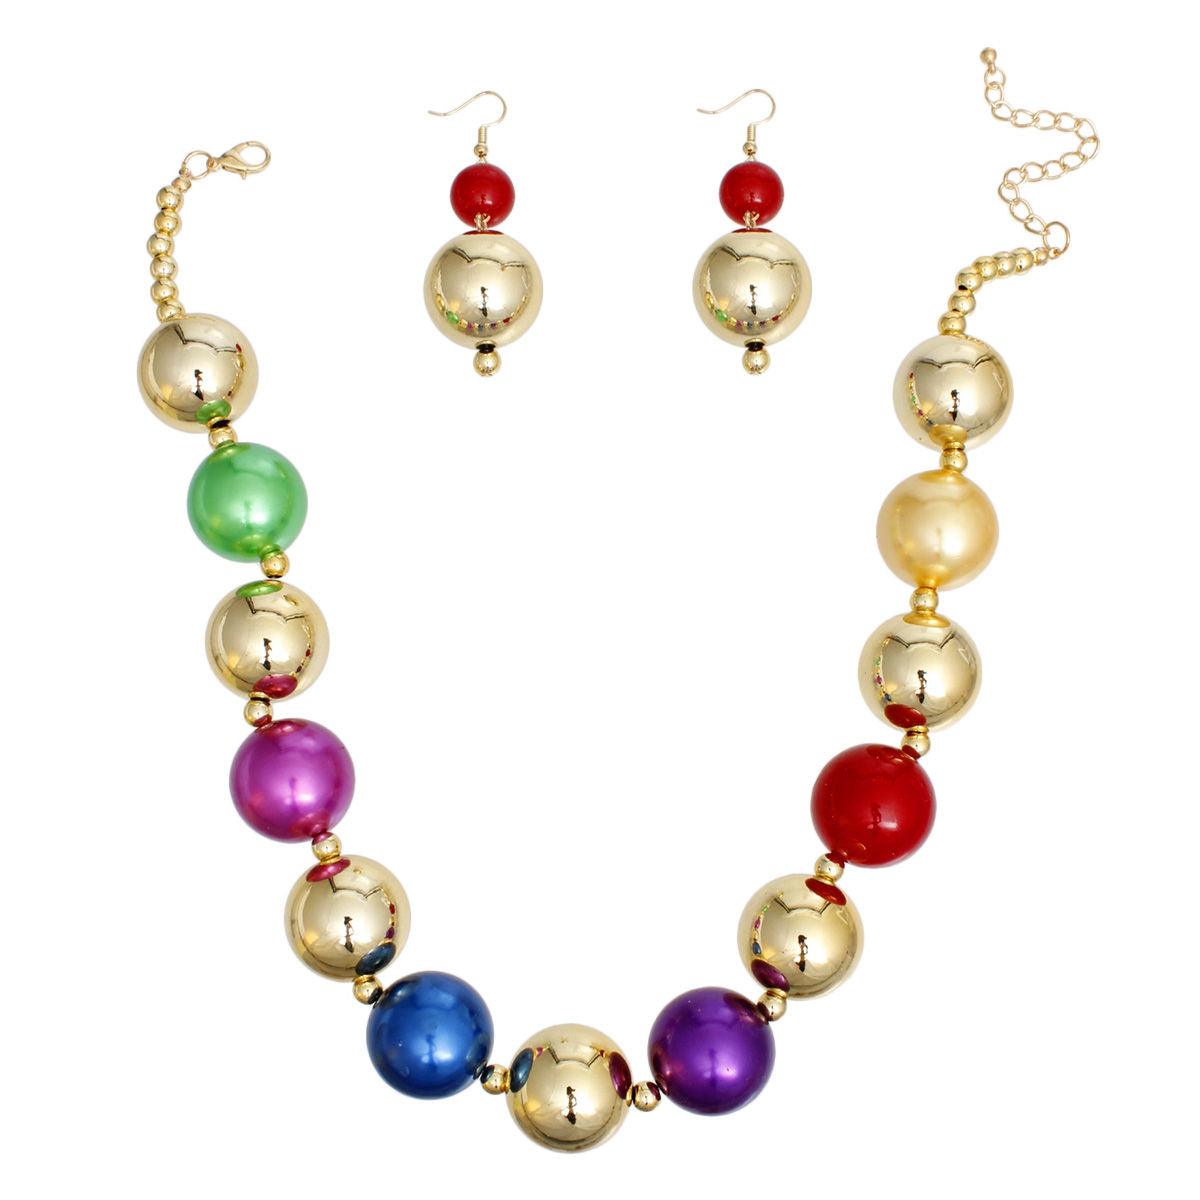 Bauble Pearl Multicolor Gold Necklace Earrings Set - Level Up Your Fashion Jewelry Collection